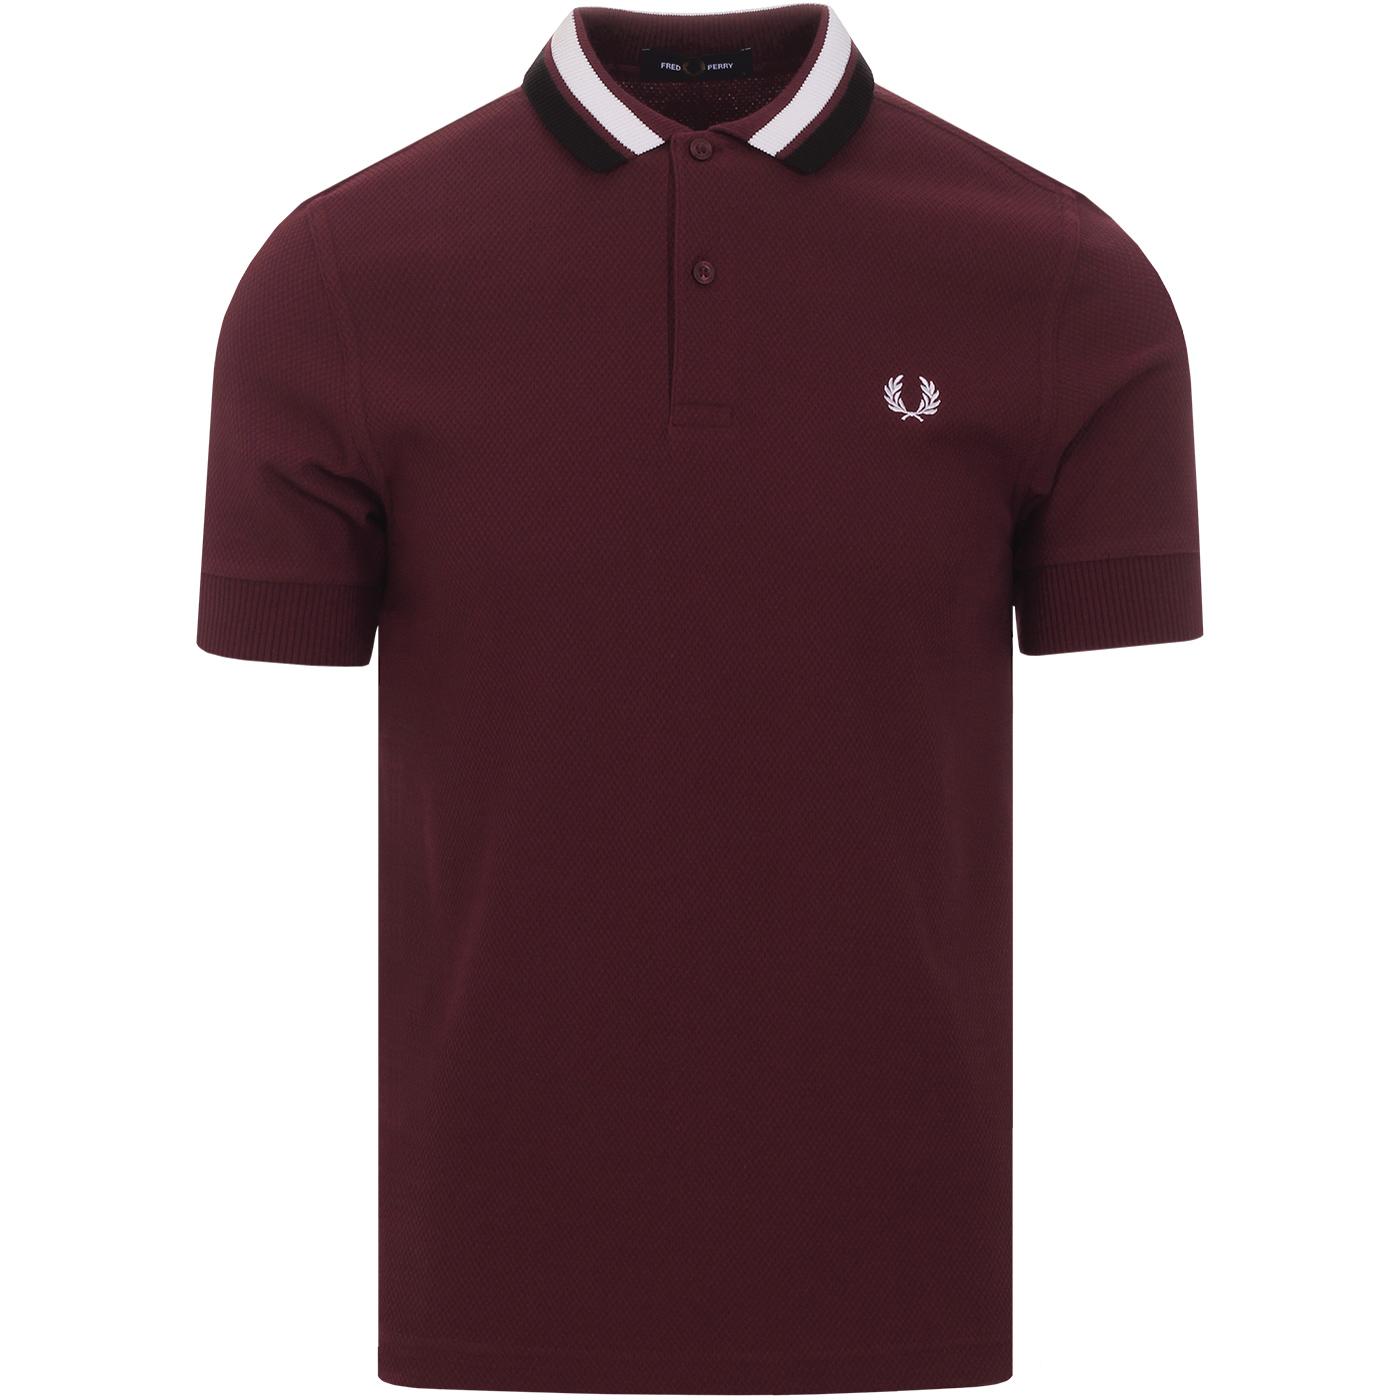 FRED PERRY Mod Bold Tipped Textured Polo Top in Mahogany